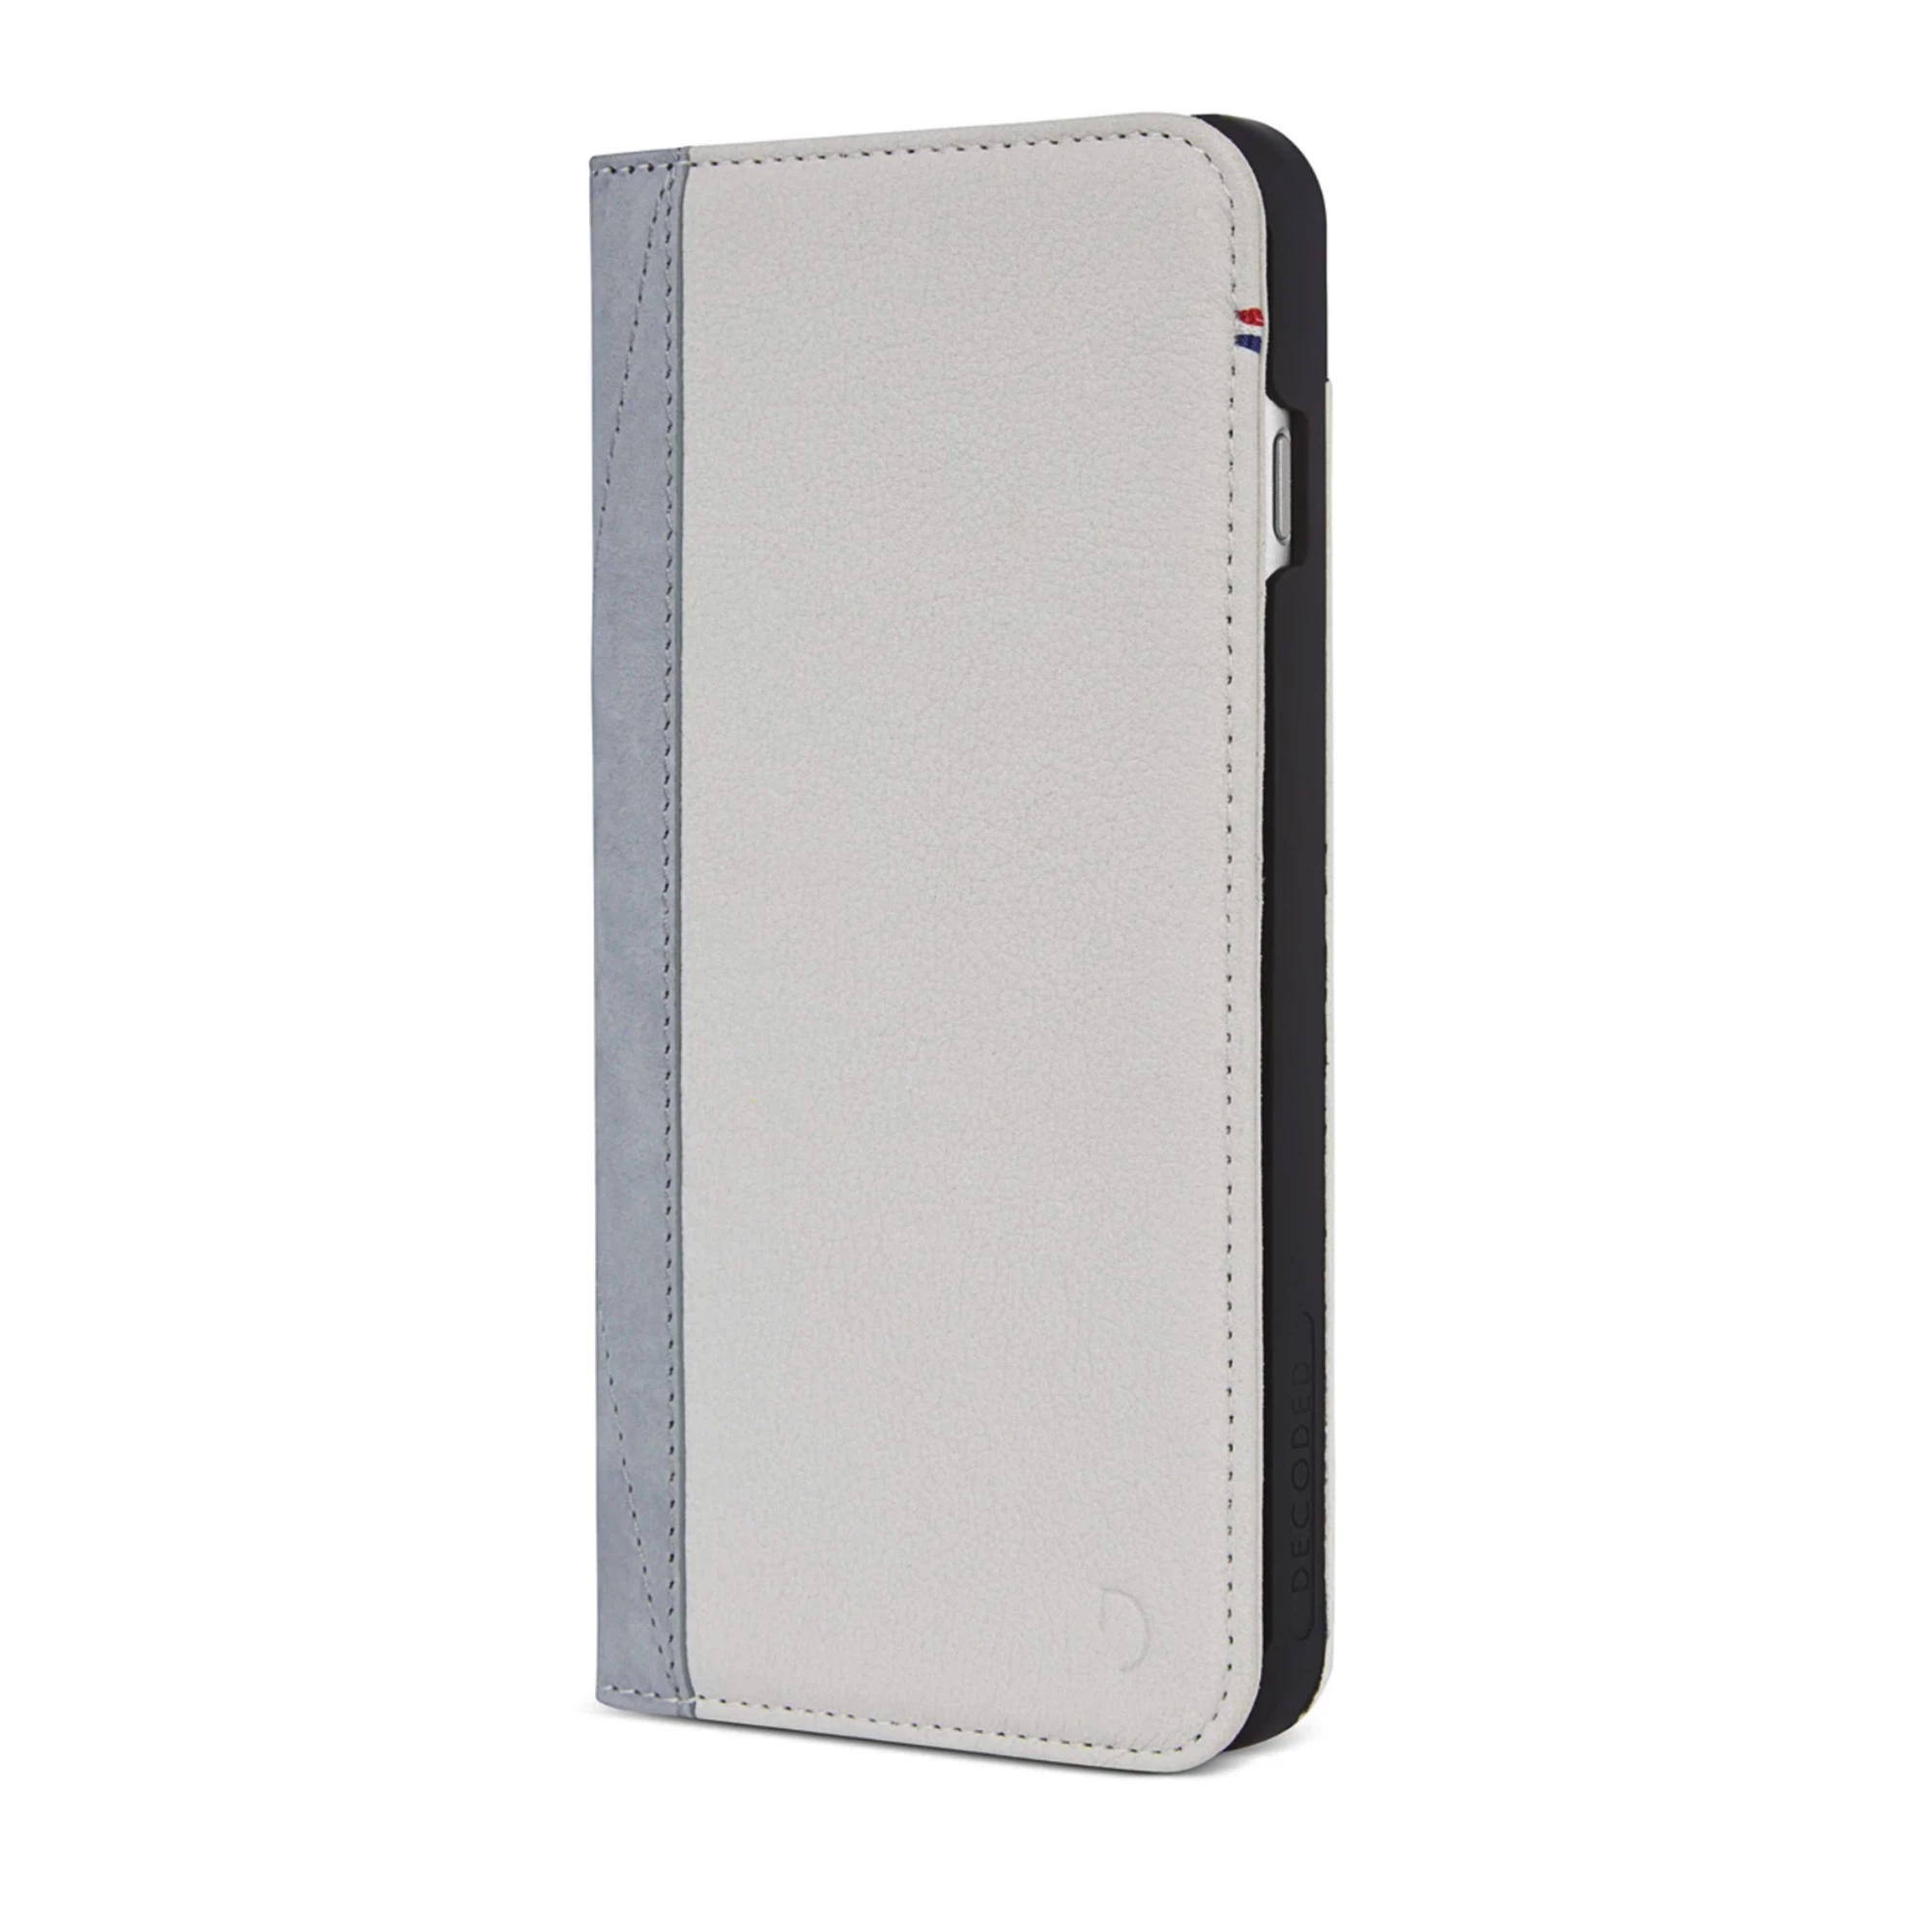 DECODED Leather Wallet Case White / Grey for iPhone SE 2020 / iPhone 8/7 / 6s / 6 (DA6IPO7CW3WEGY)